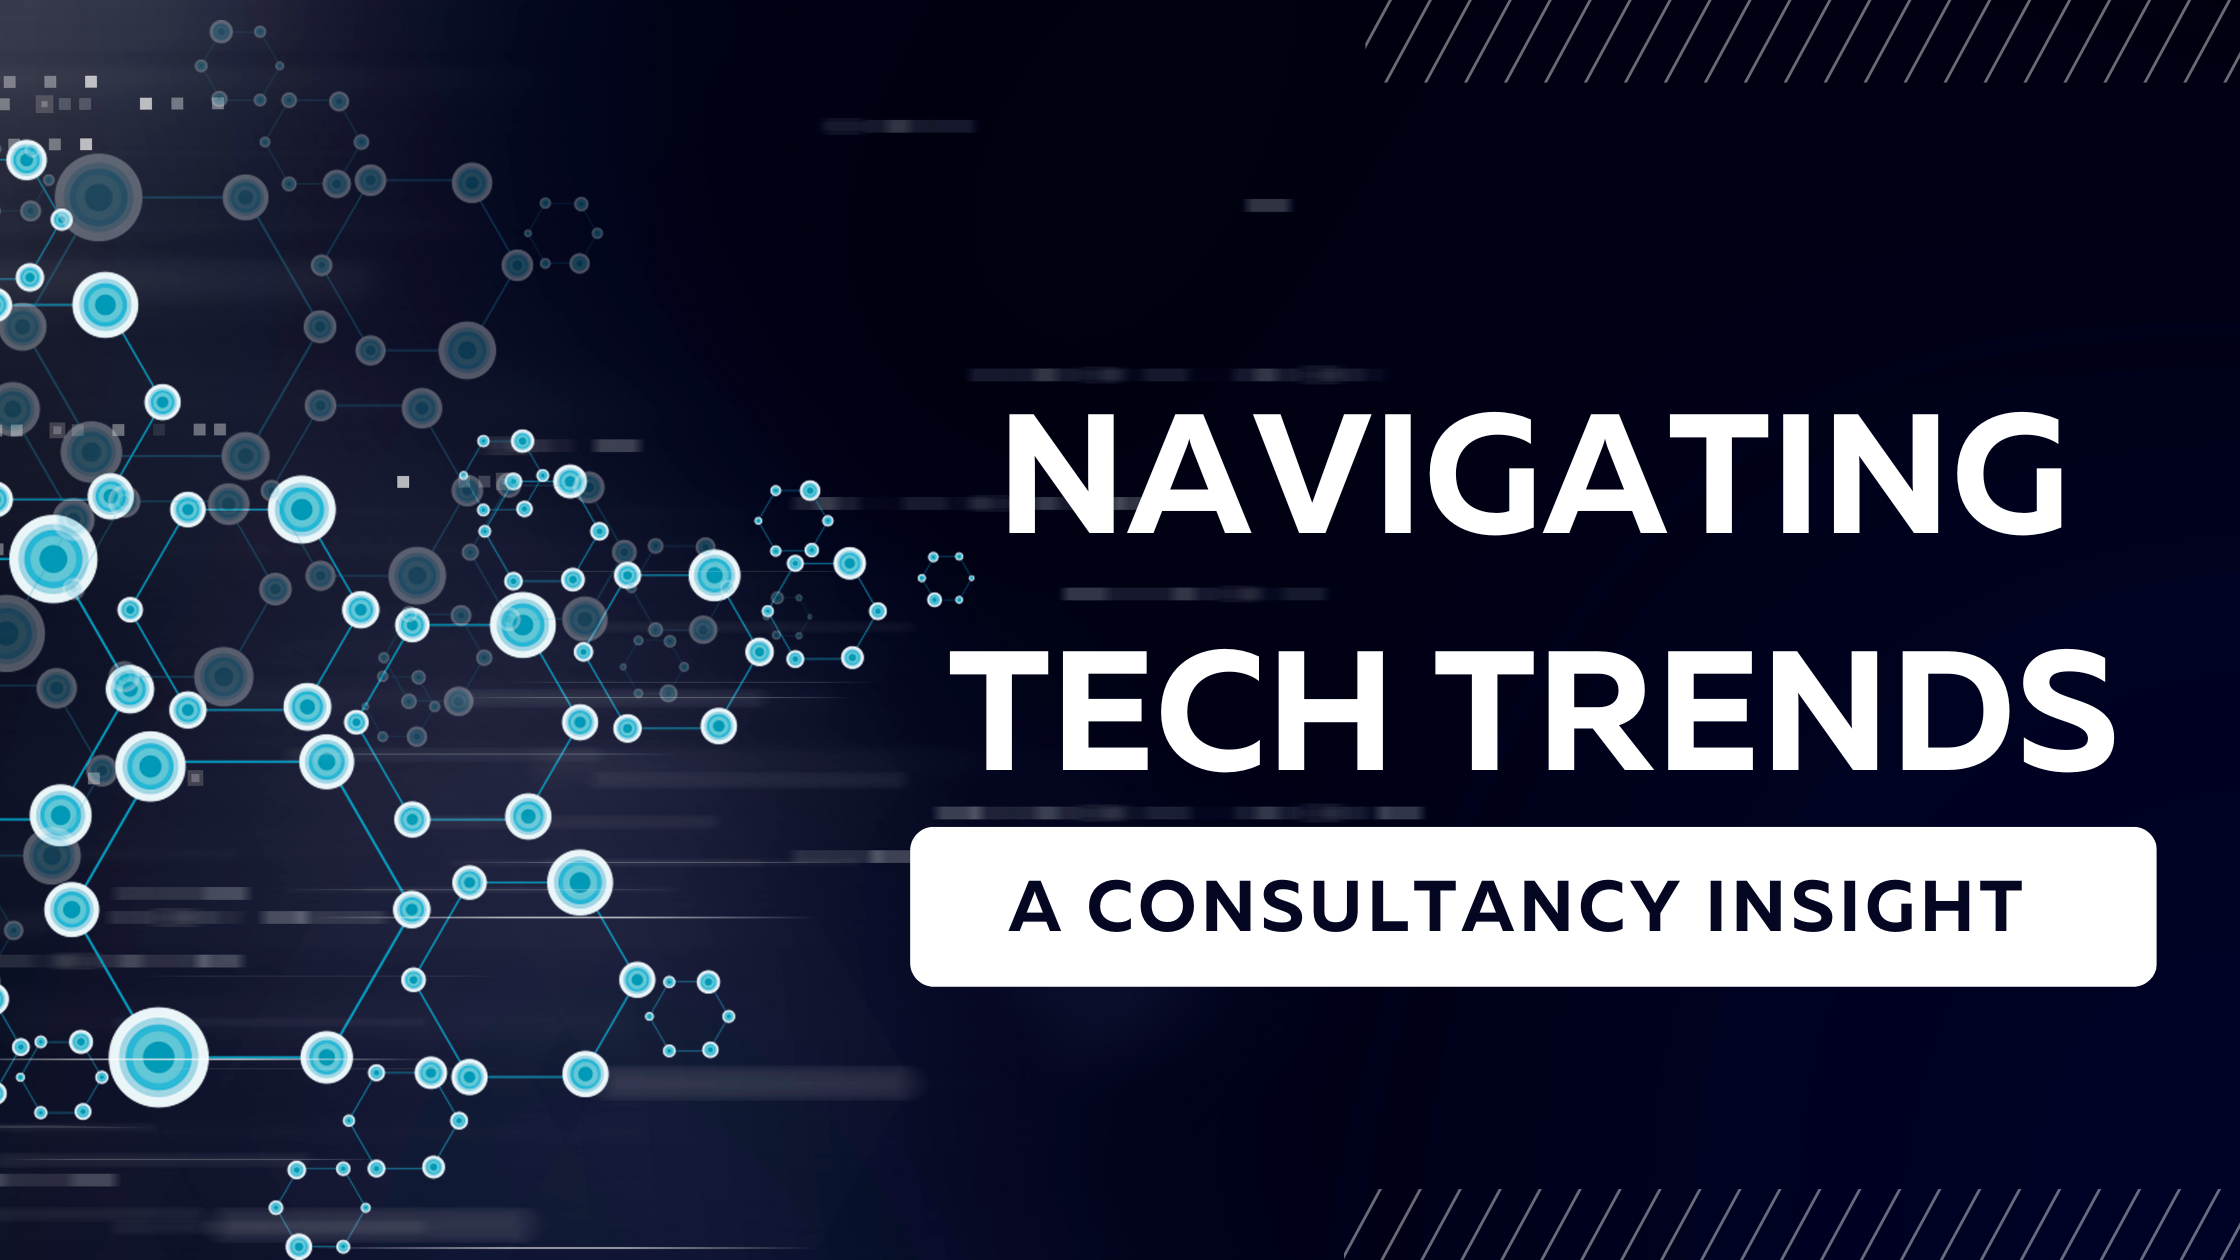 Navigating Tech Trends: A Consultancy Insight